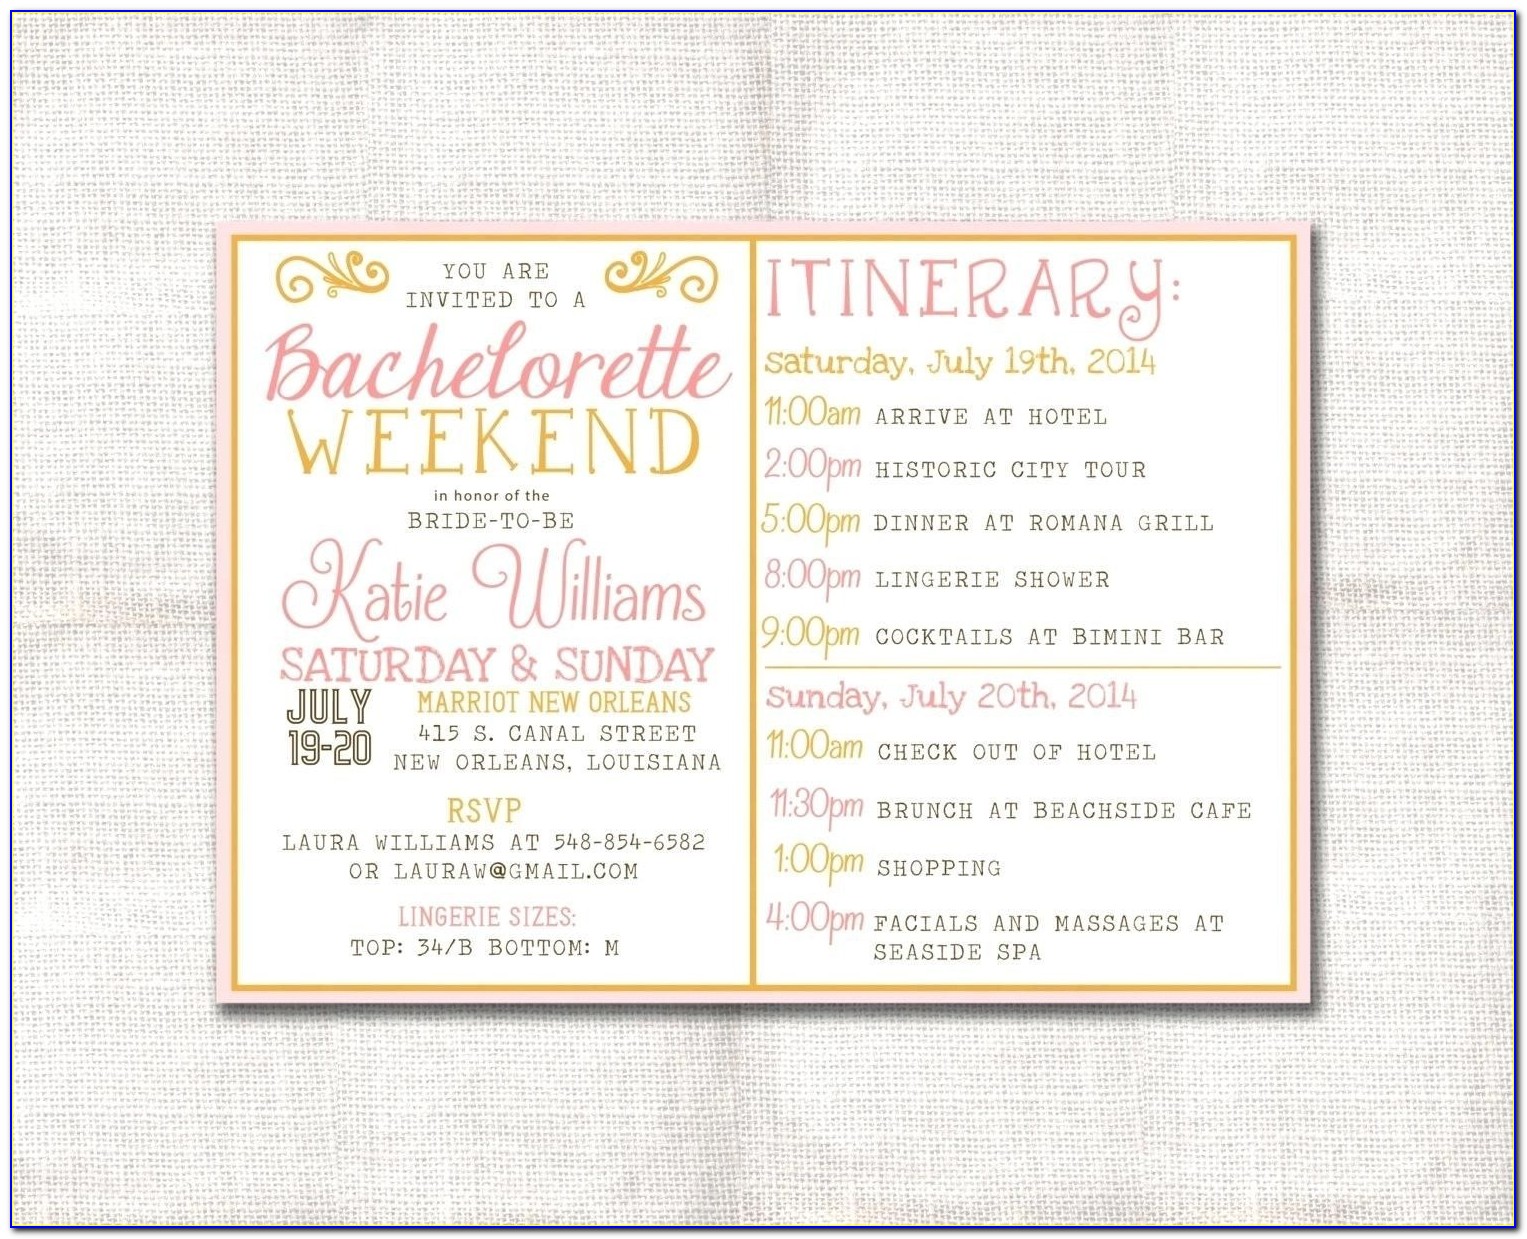 Online Bachelorette Itinerary Template